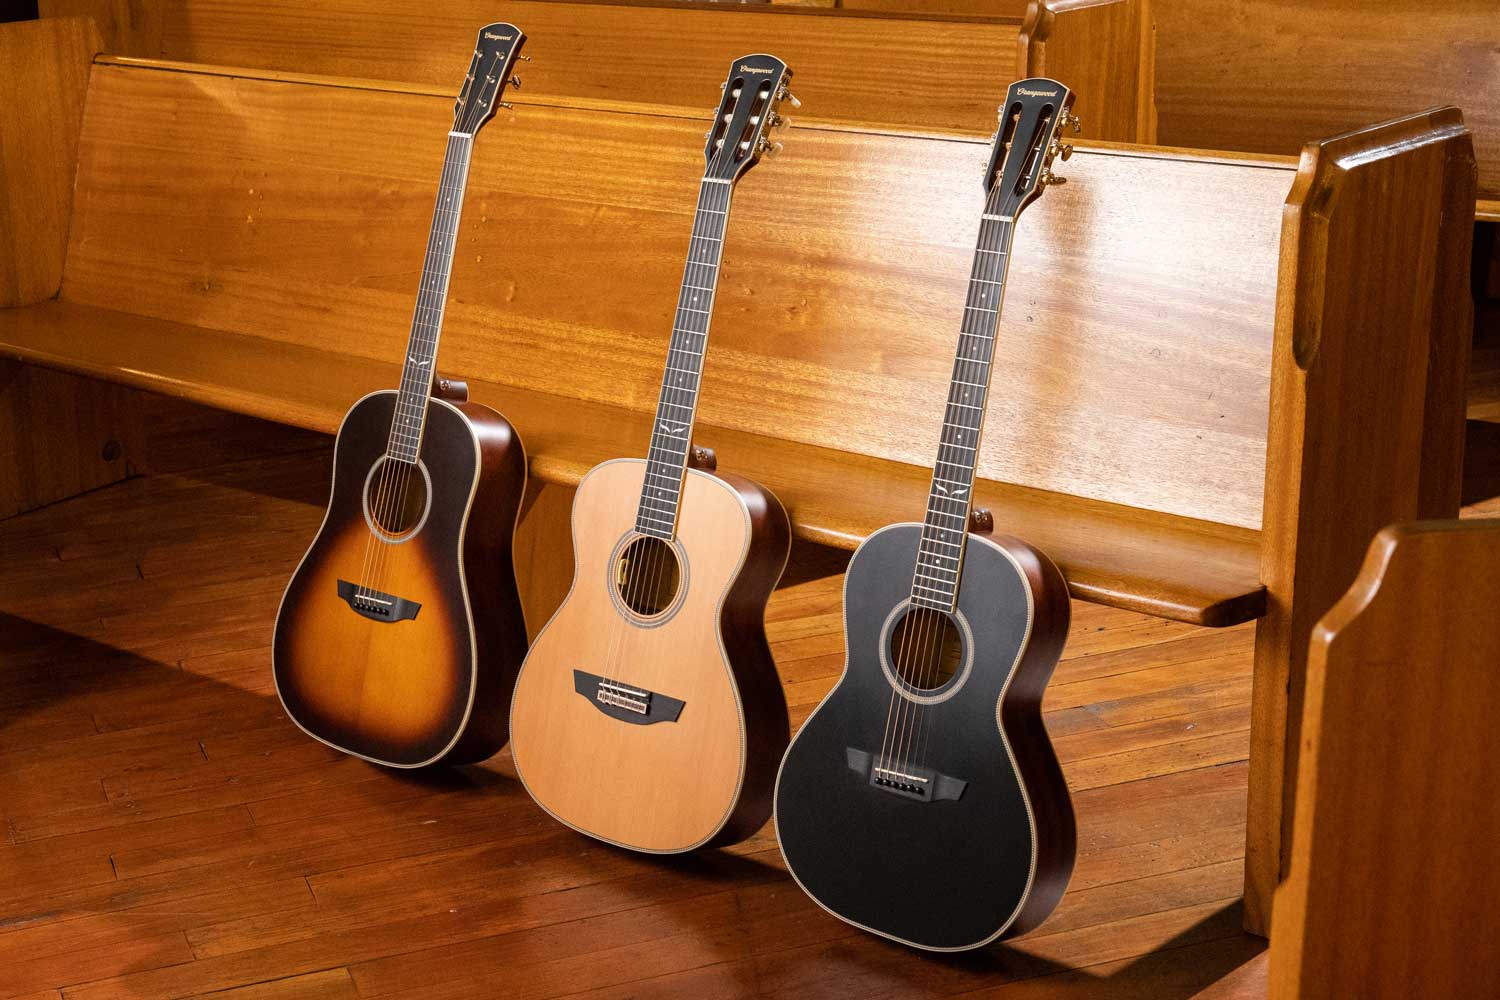 Three guitars lined up against a wooden pew: sloped shoulder, nylon string, and black parlor